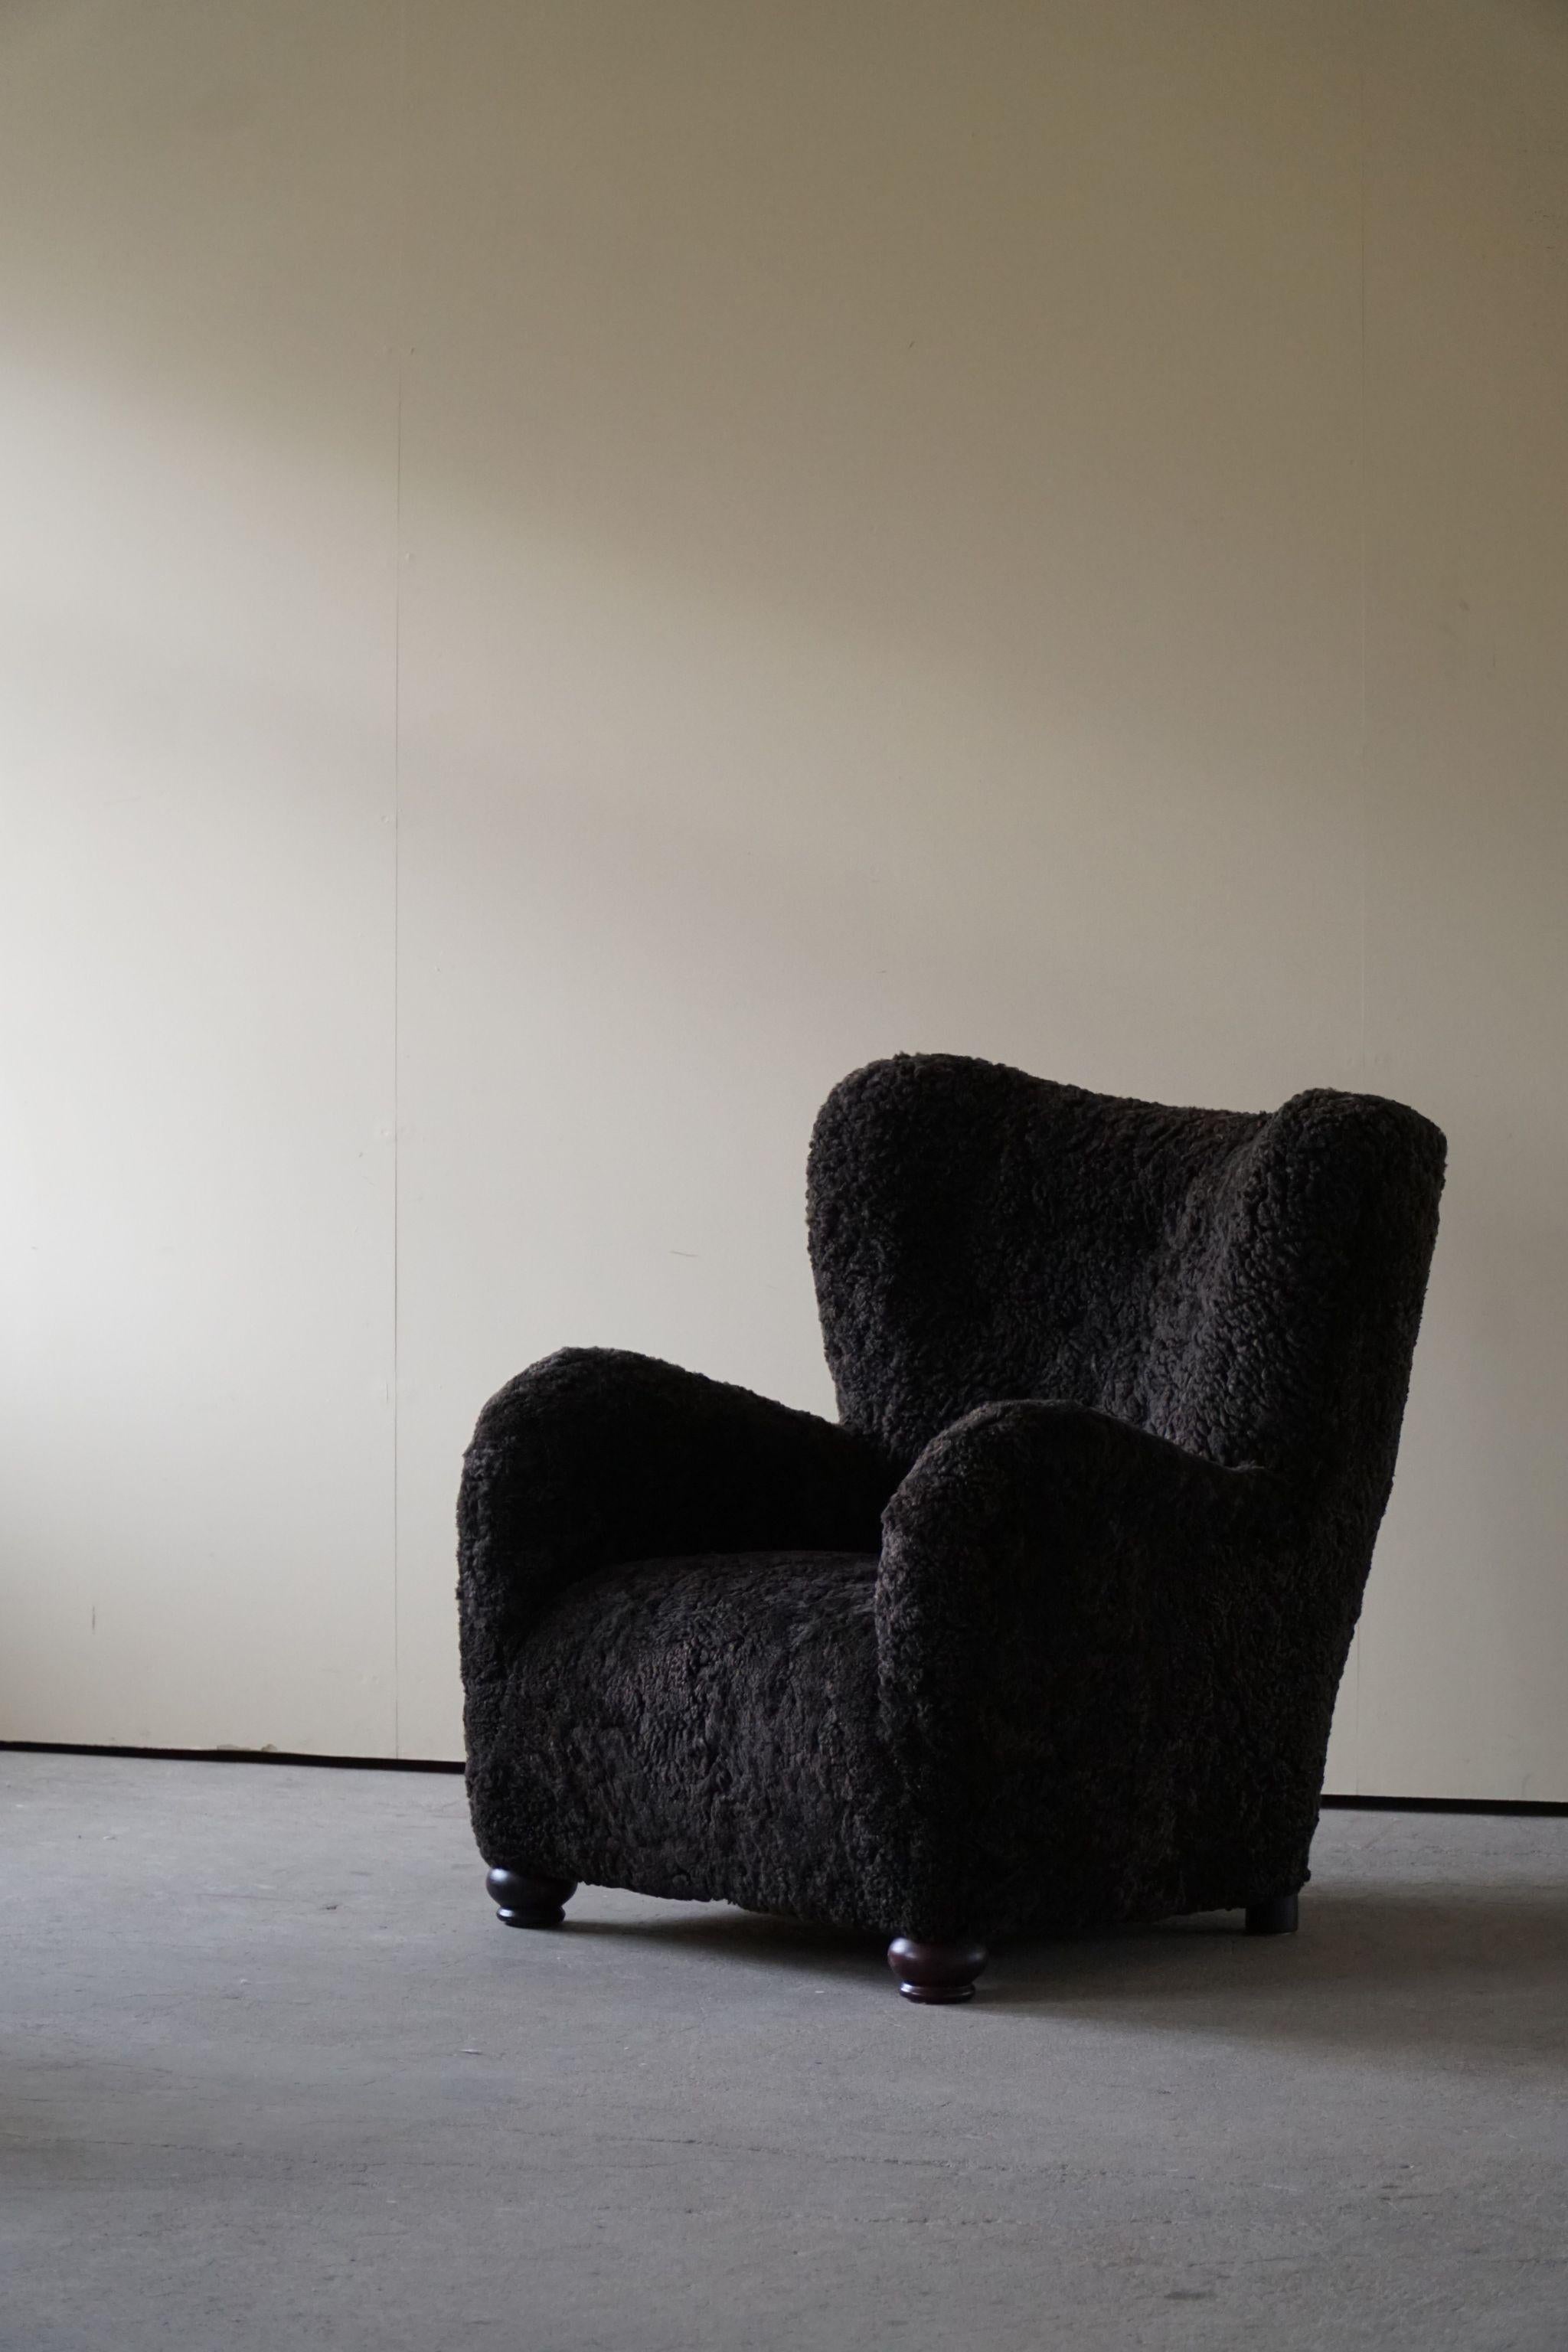 Such a generous and comfortable lounge chair made in the style of Marta Blomstedt.
Intriguing shape and curves featured in this teddy bear, crafted by a skilled cabinetmaker in Sweden, circa 1950s.

This appealing armchair will complement many